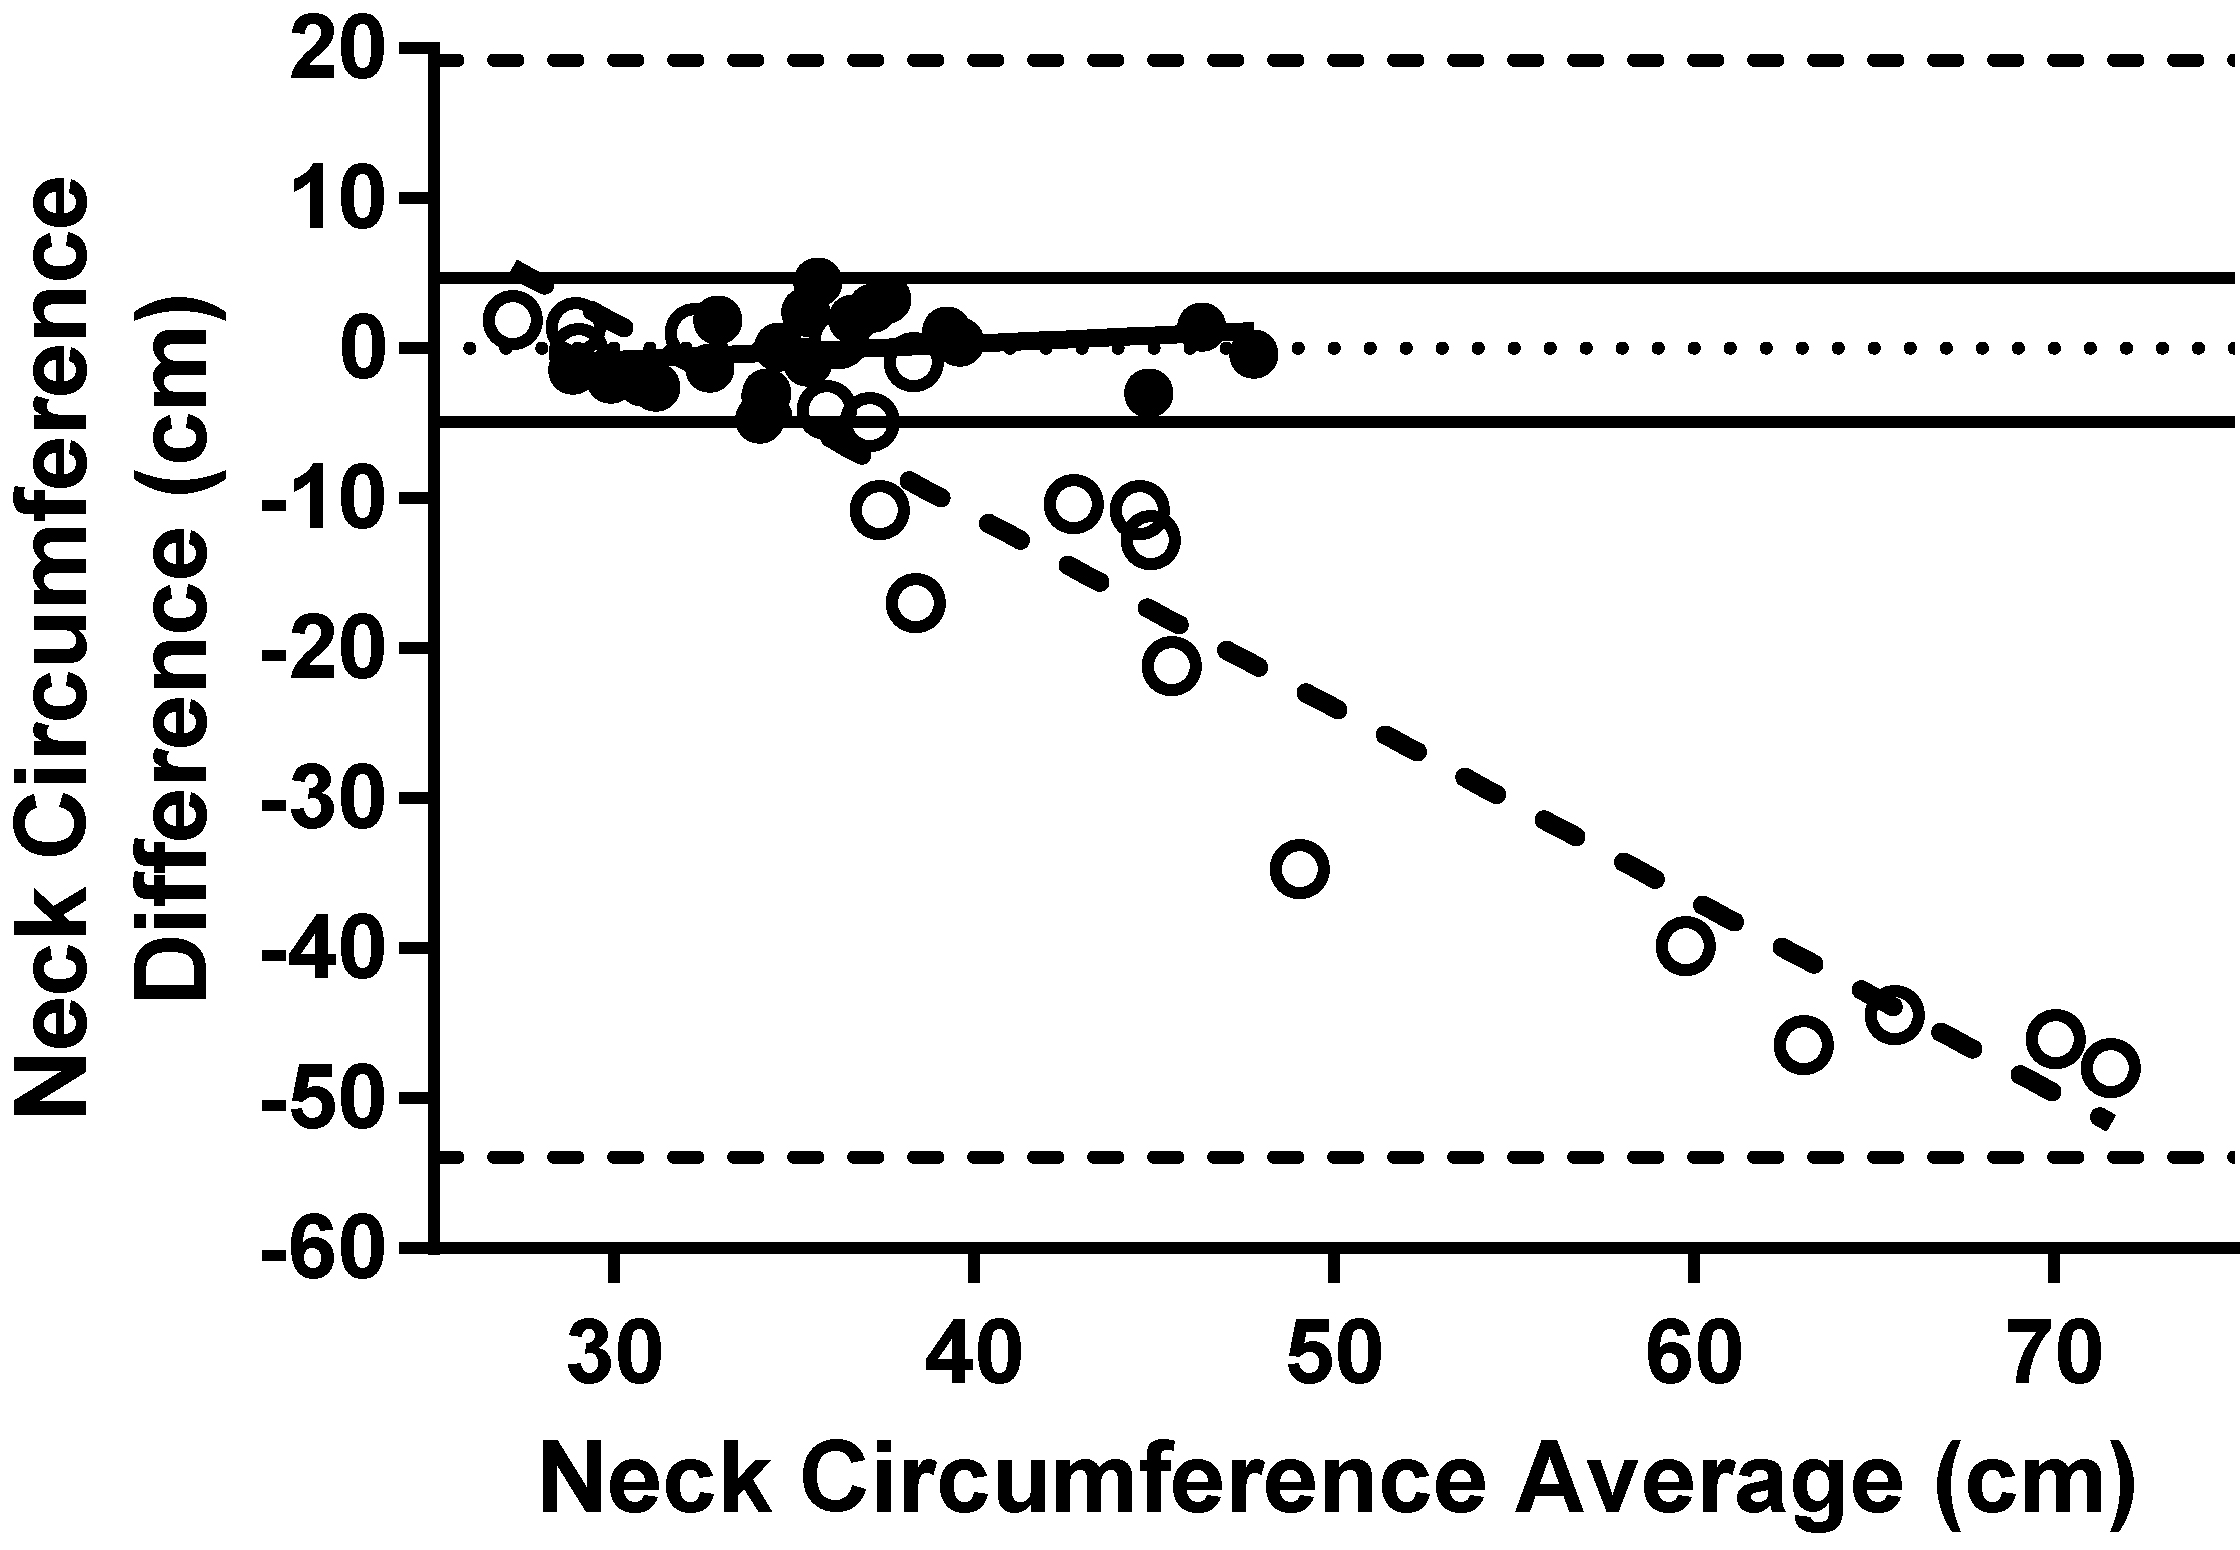 Analysis of the effect of the regression equations on the neck circumference measurements. The Bland-Altman analysis for the measured and scanned measurements is presented using open circles and dotted line (linear regression and 95% CI). The Bland-Altman analysis for the measured and adjusted scanned mesurements is presented using closed circles and full line (linear regression and 95% CI).